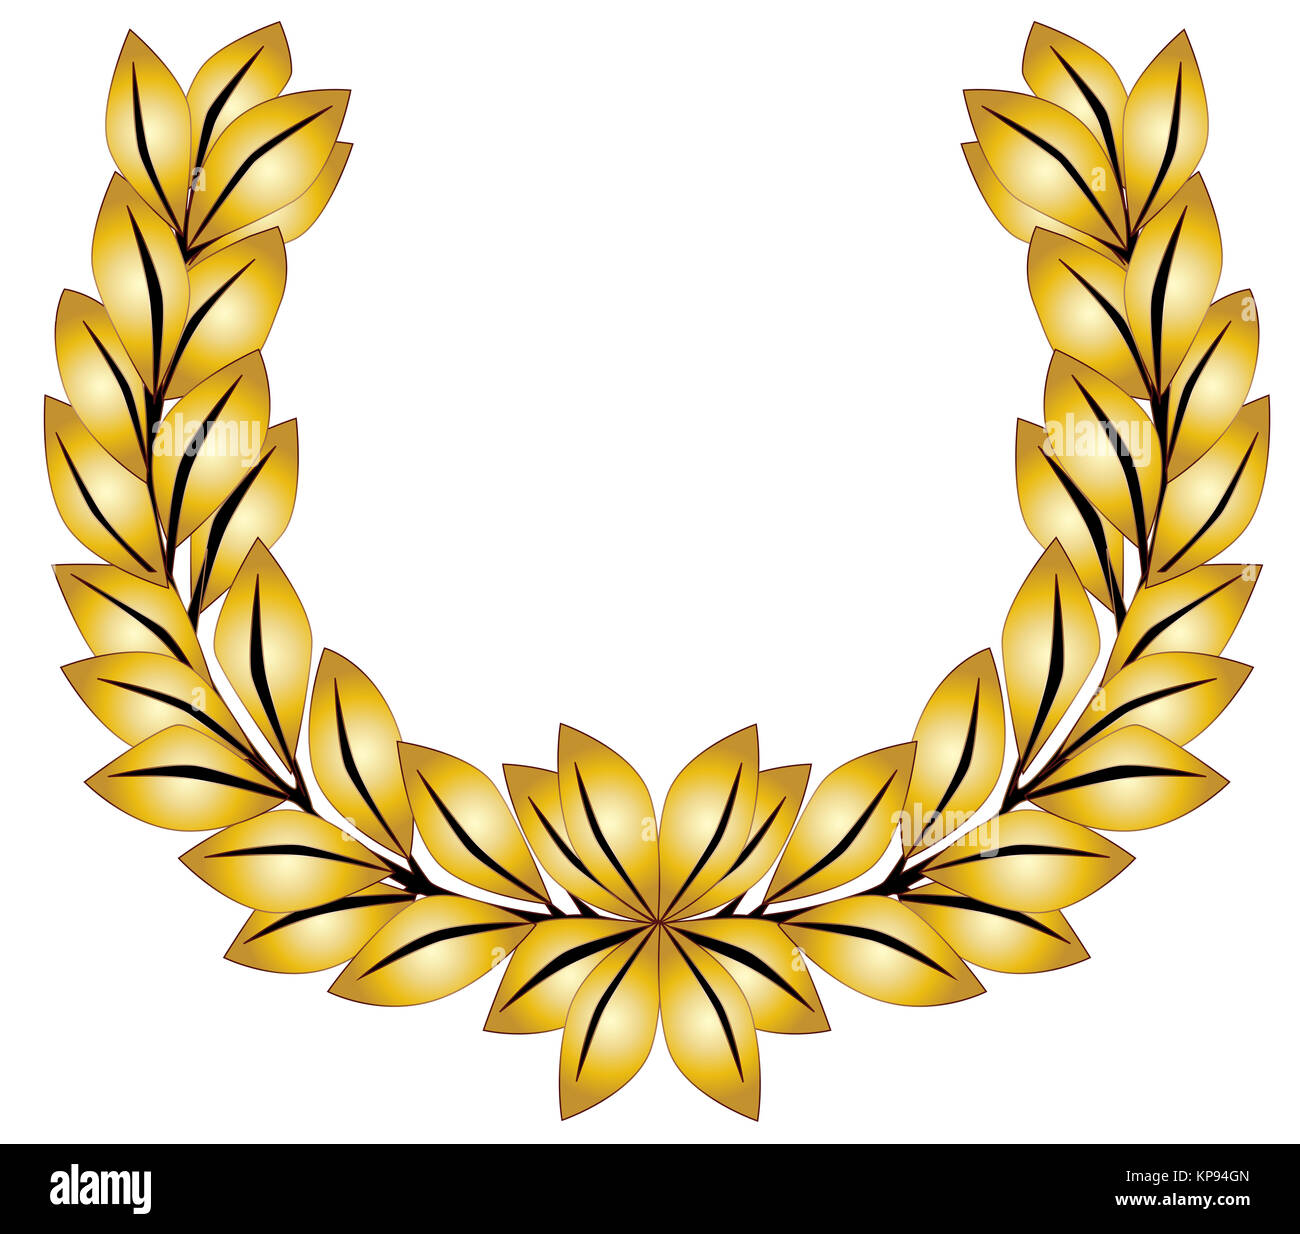 Laurel crown Cut Out Stock Images & Pictures - Alamy